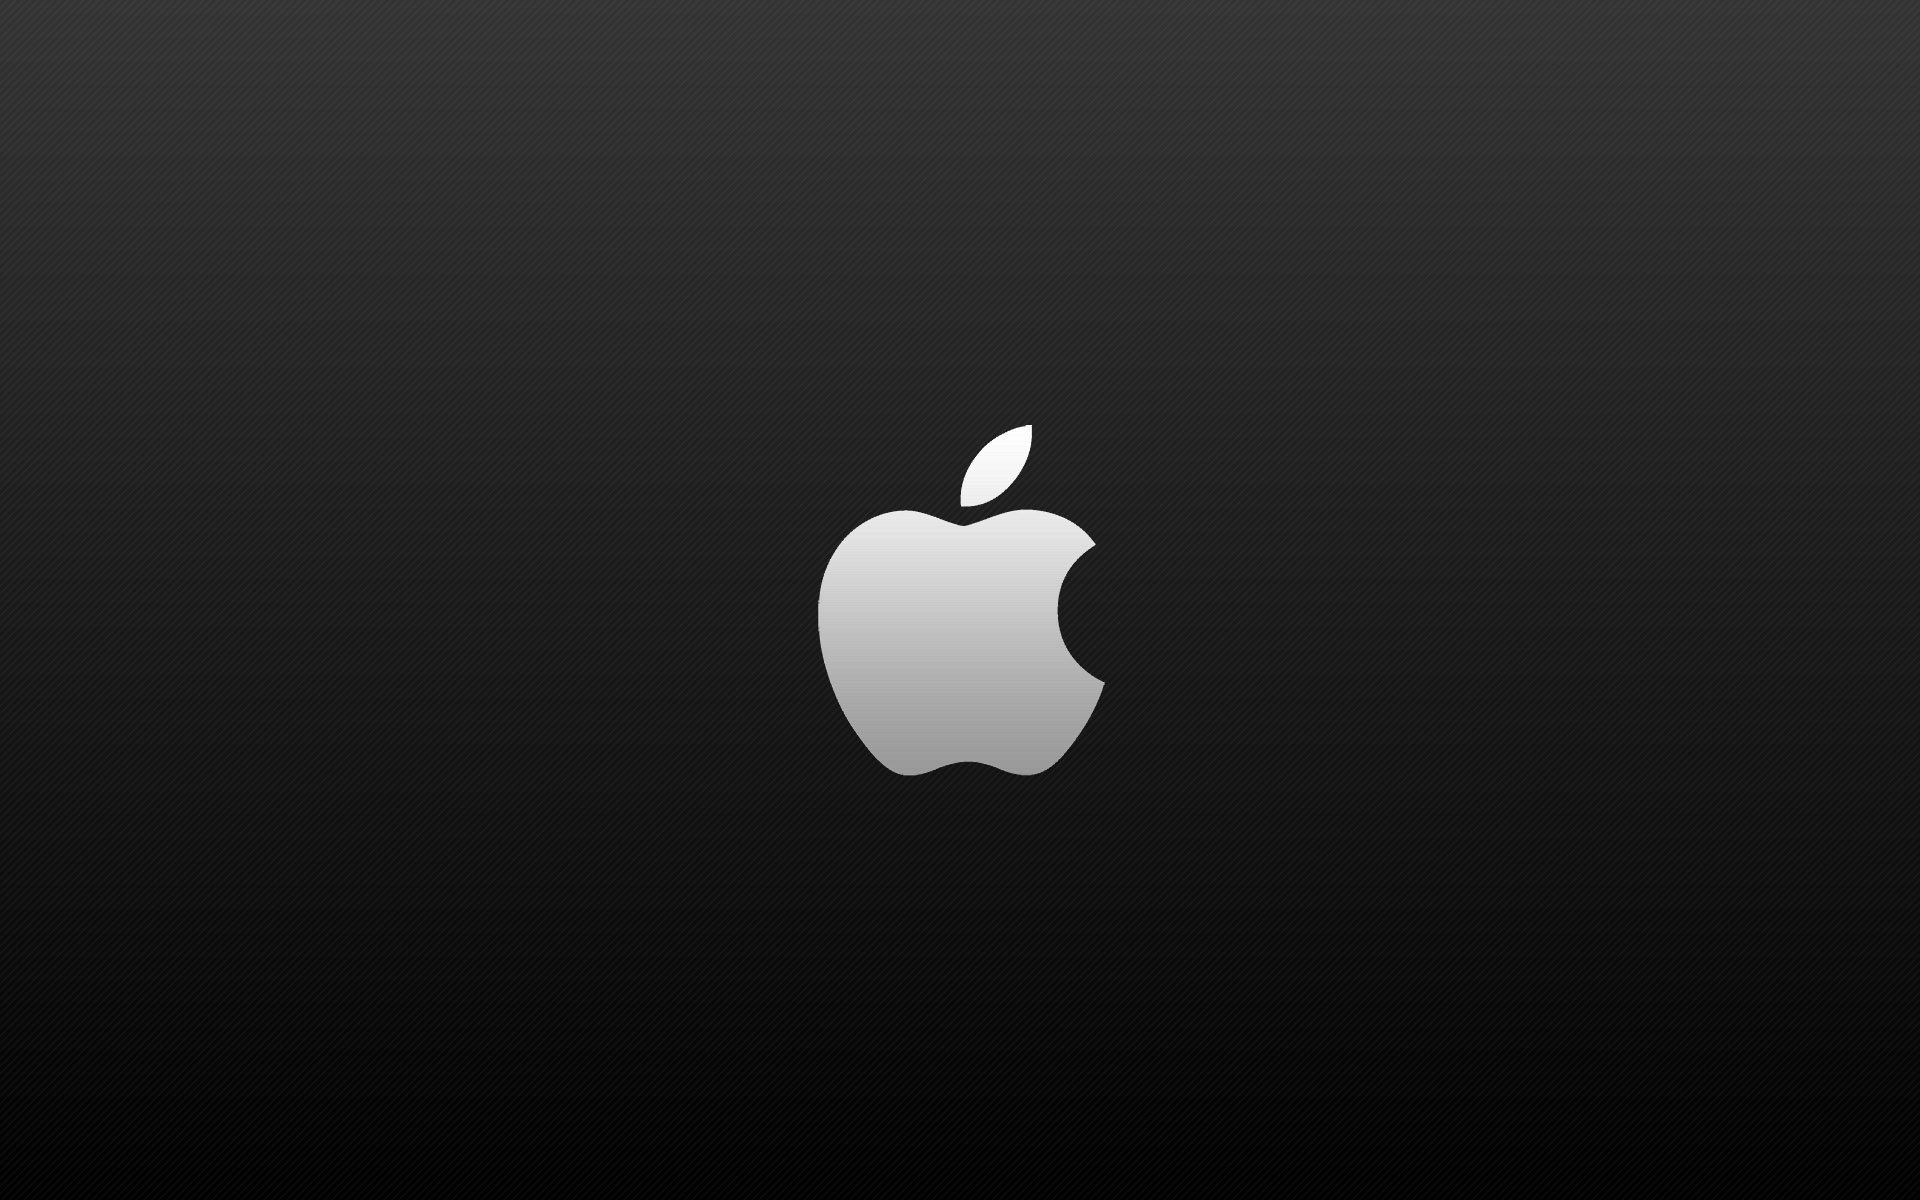 Cool, logo, background, apple, different, media, think (#144394)